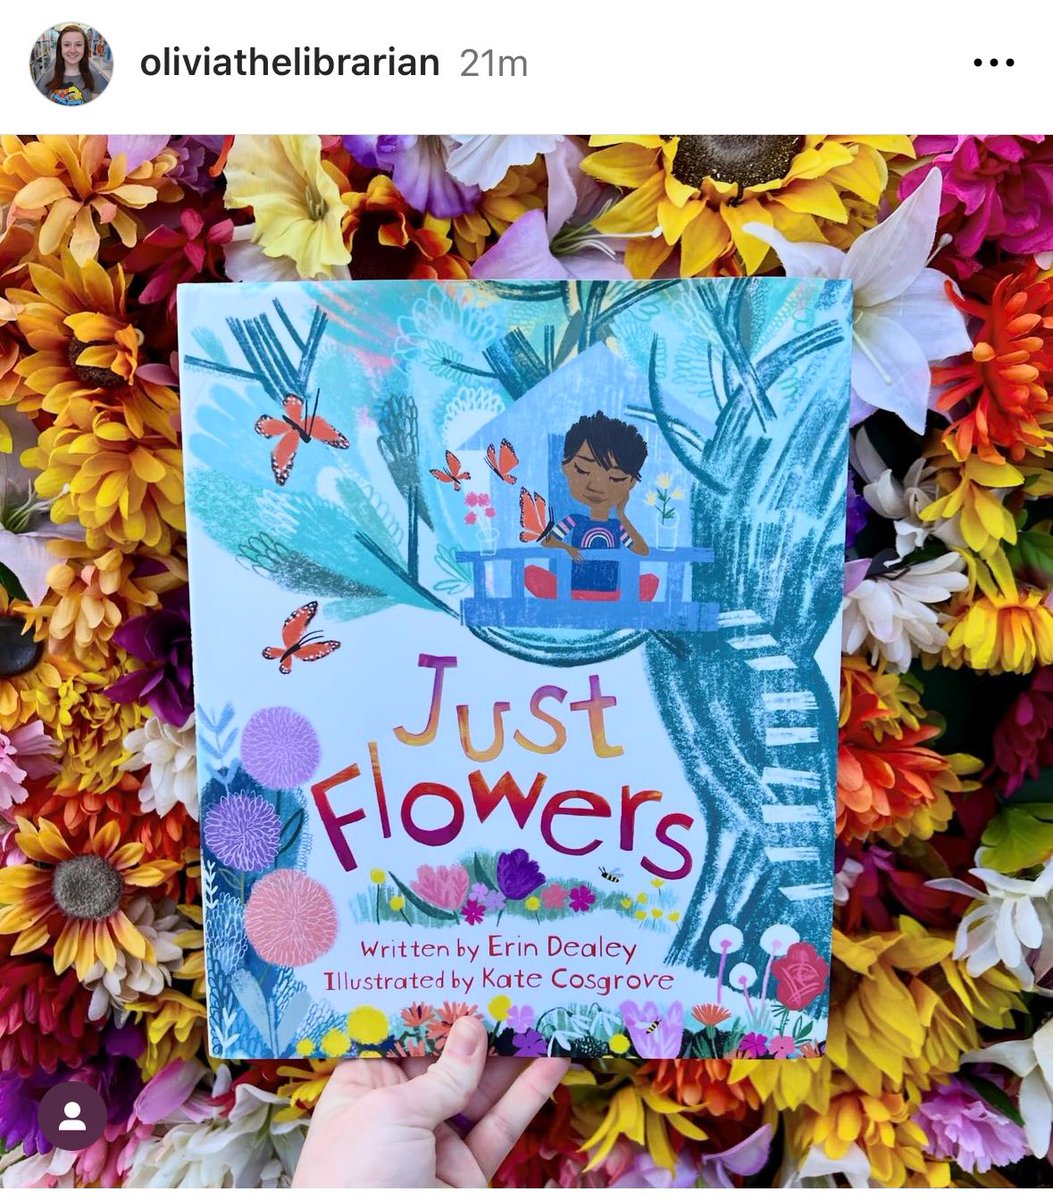 Thank you oliviathelibrarian for this wonderful review of JUST FLOWERS Illus. @K8_Cosgrove @SleepingBearBks 🦋🌷🌸❤️🌻🌺📚#generosity + #compassion 💜📚